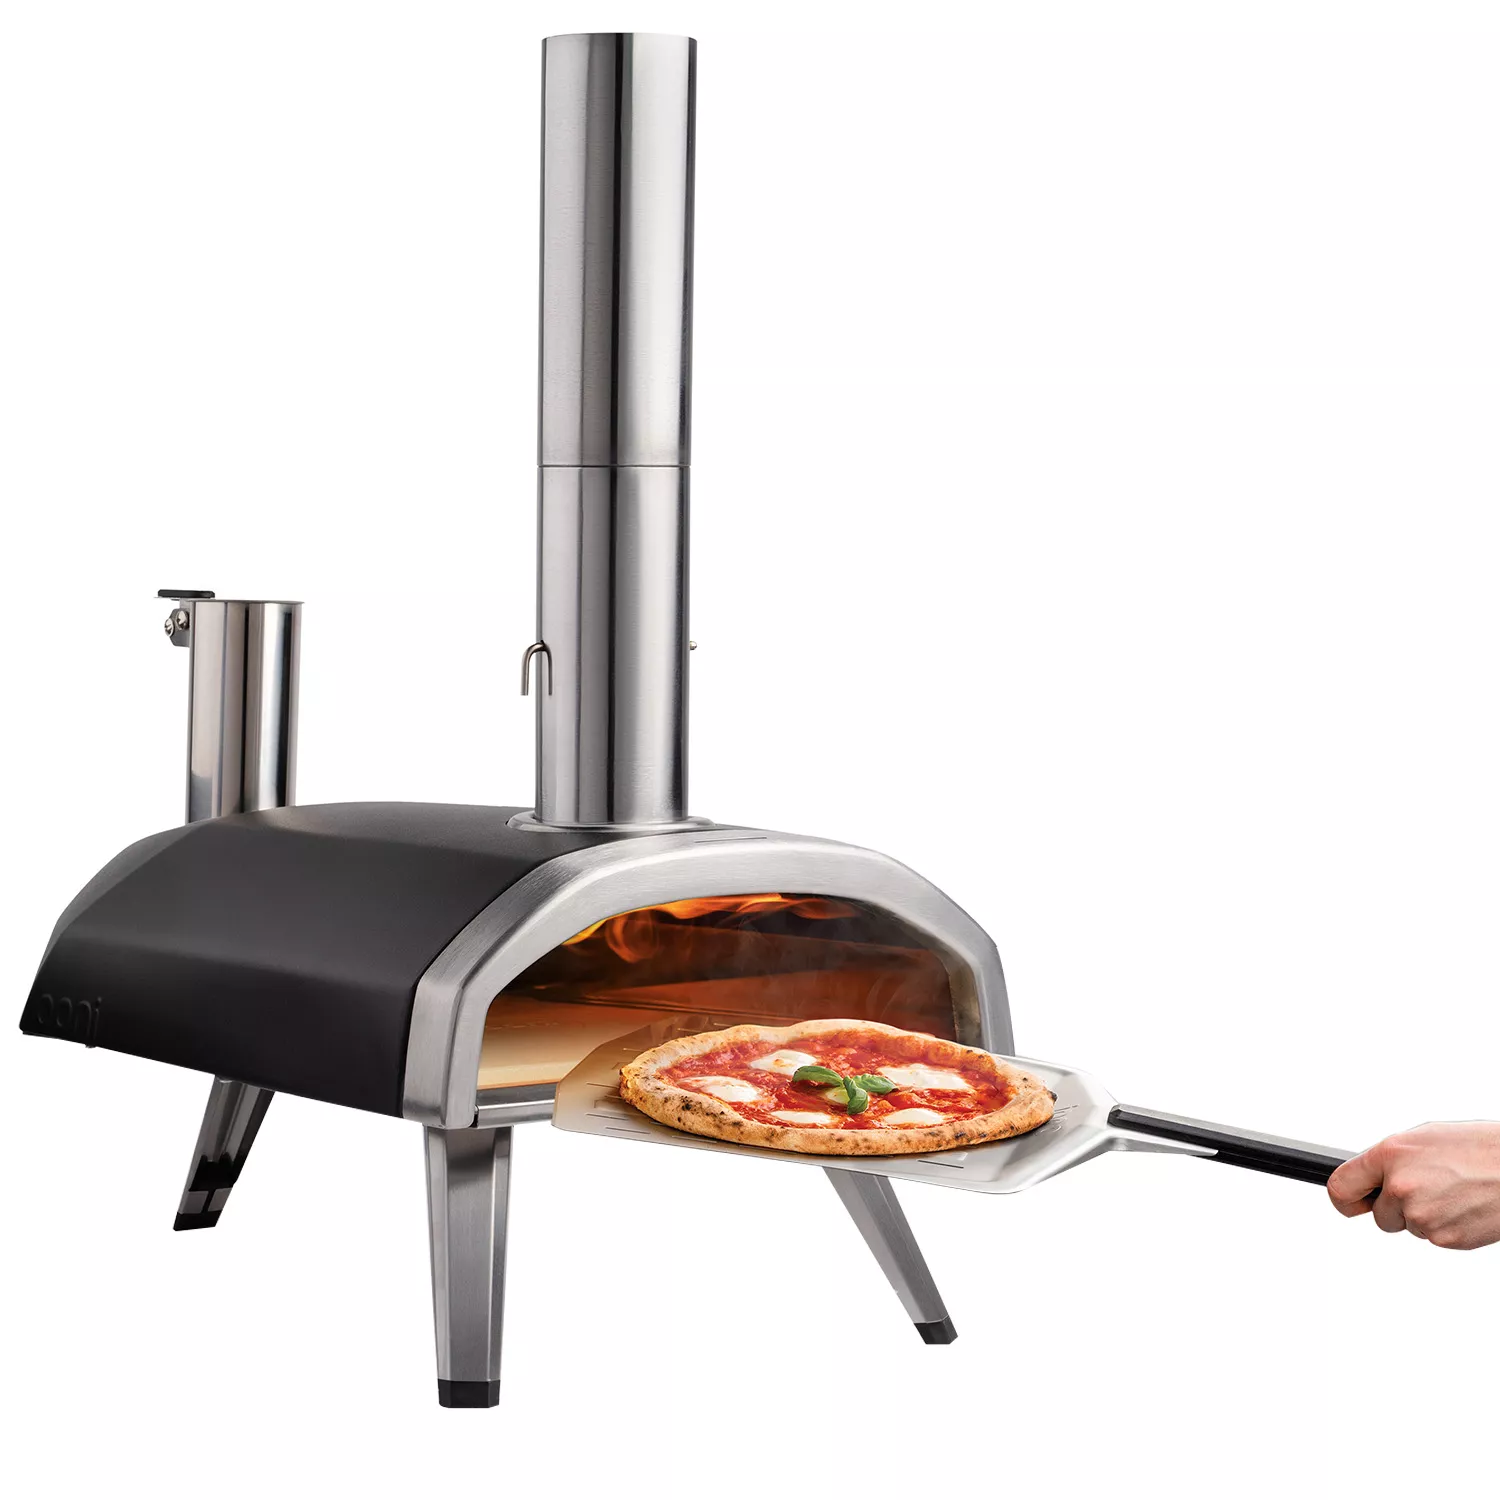 11 Best Pizza Oven Tools and Accessories